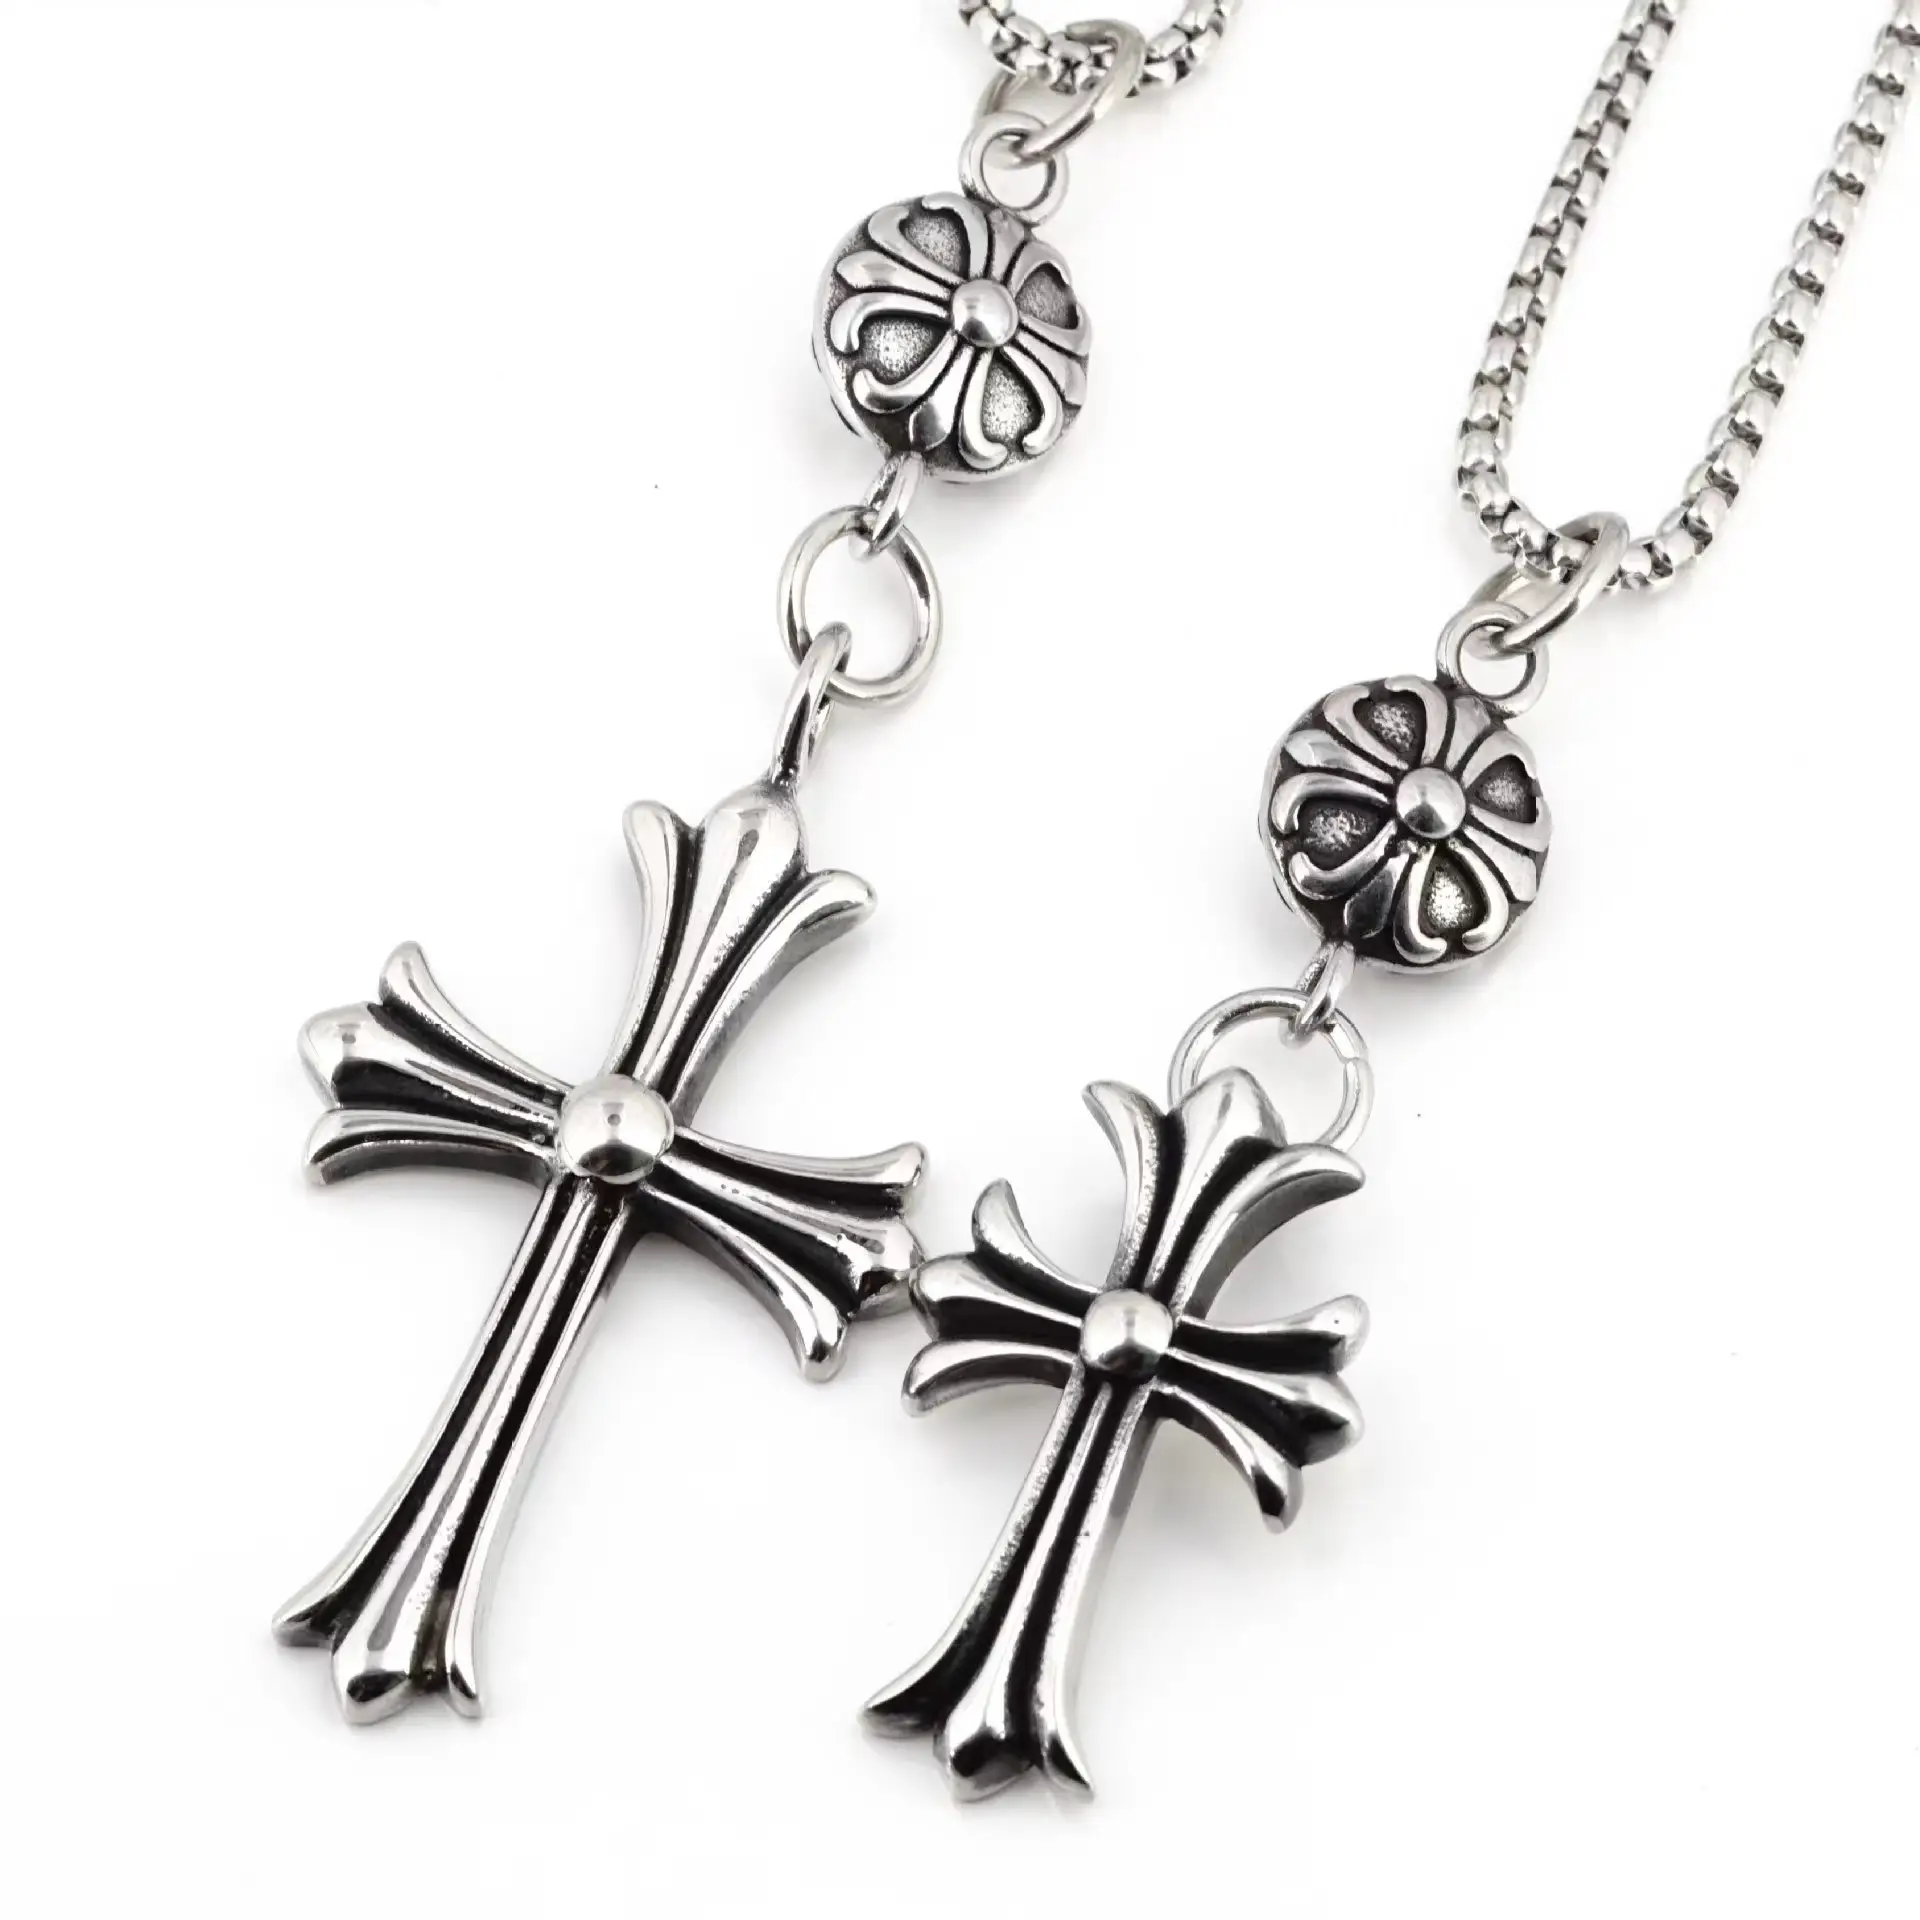 Vintage Punk Retro Cross Pendant Necklace Hearts Stainless Steel Street Trend Hip Hop Old Double Pendant Chrome Jewelry Silver